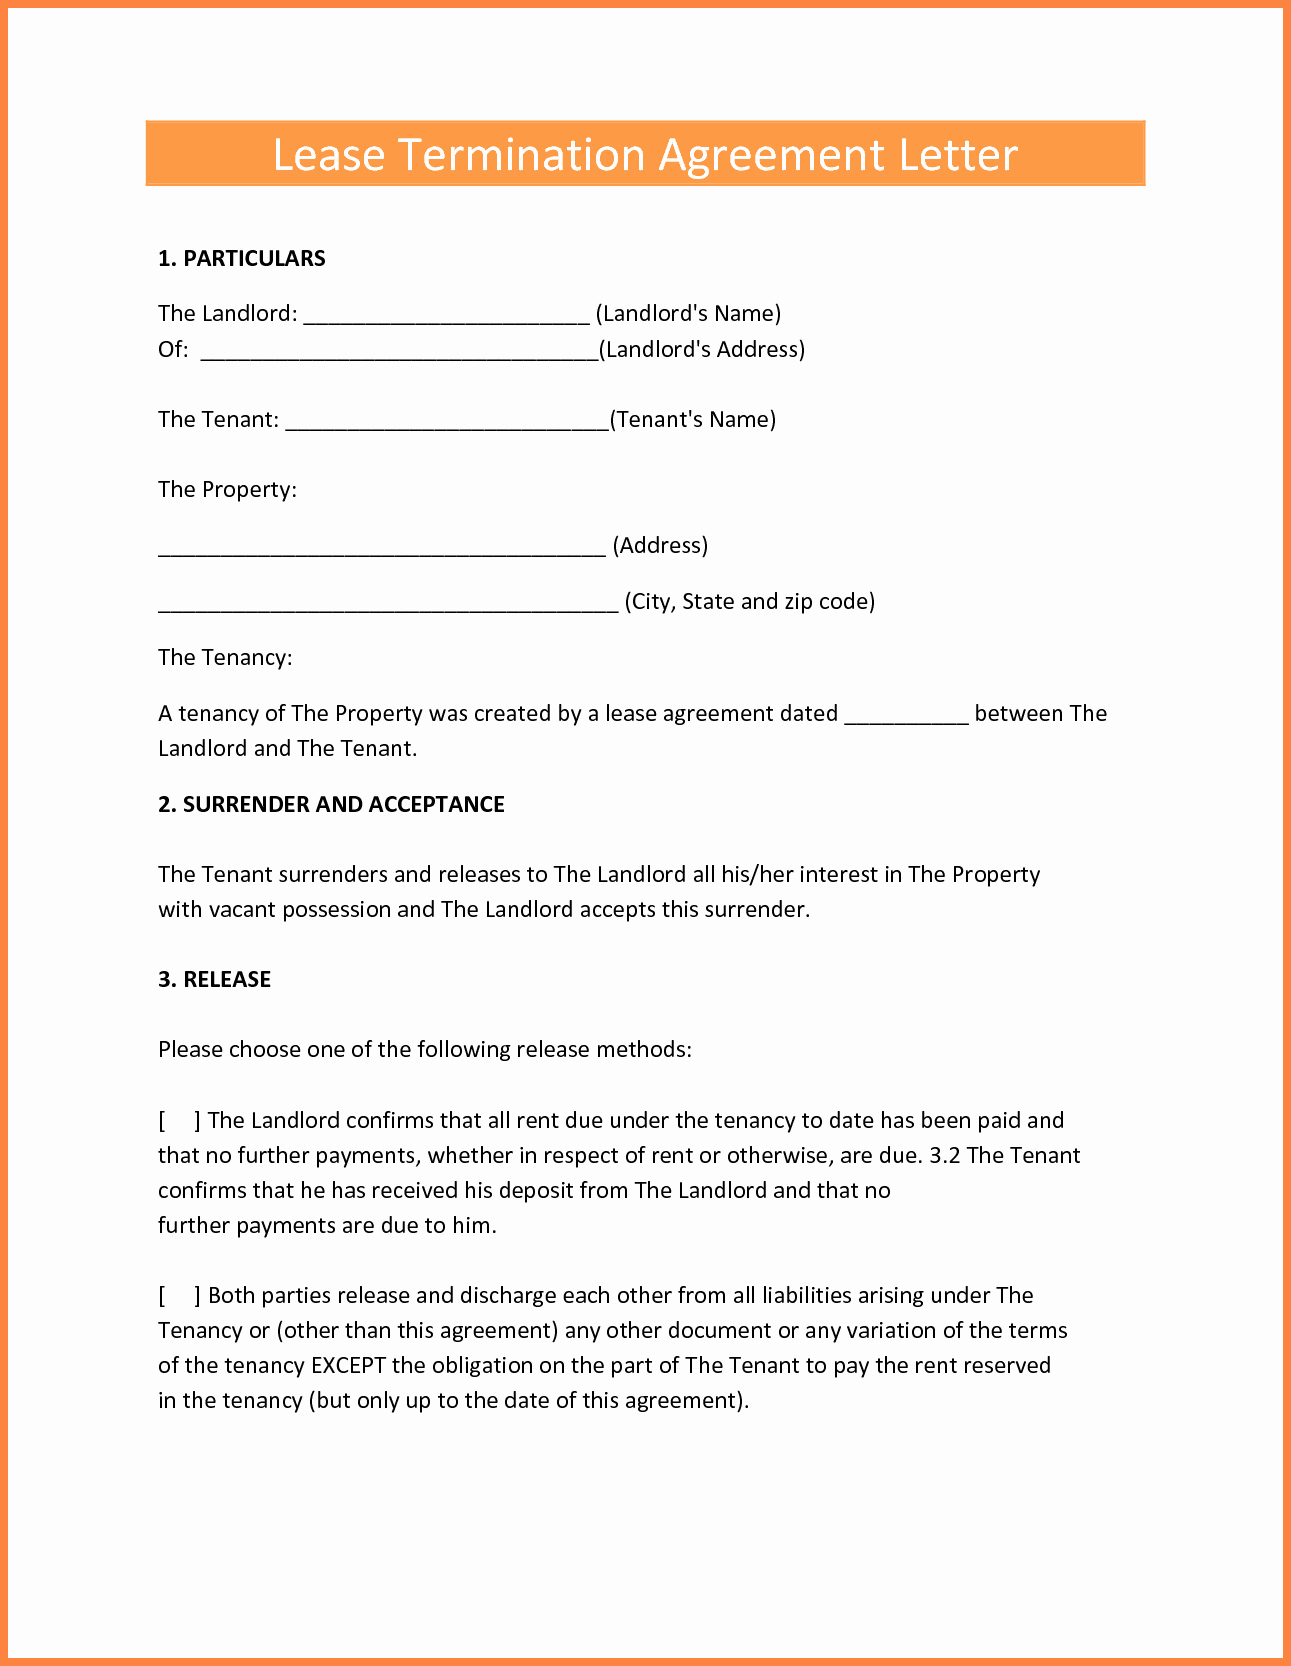 Early Termination Of Lease Agreement Template